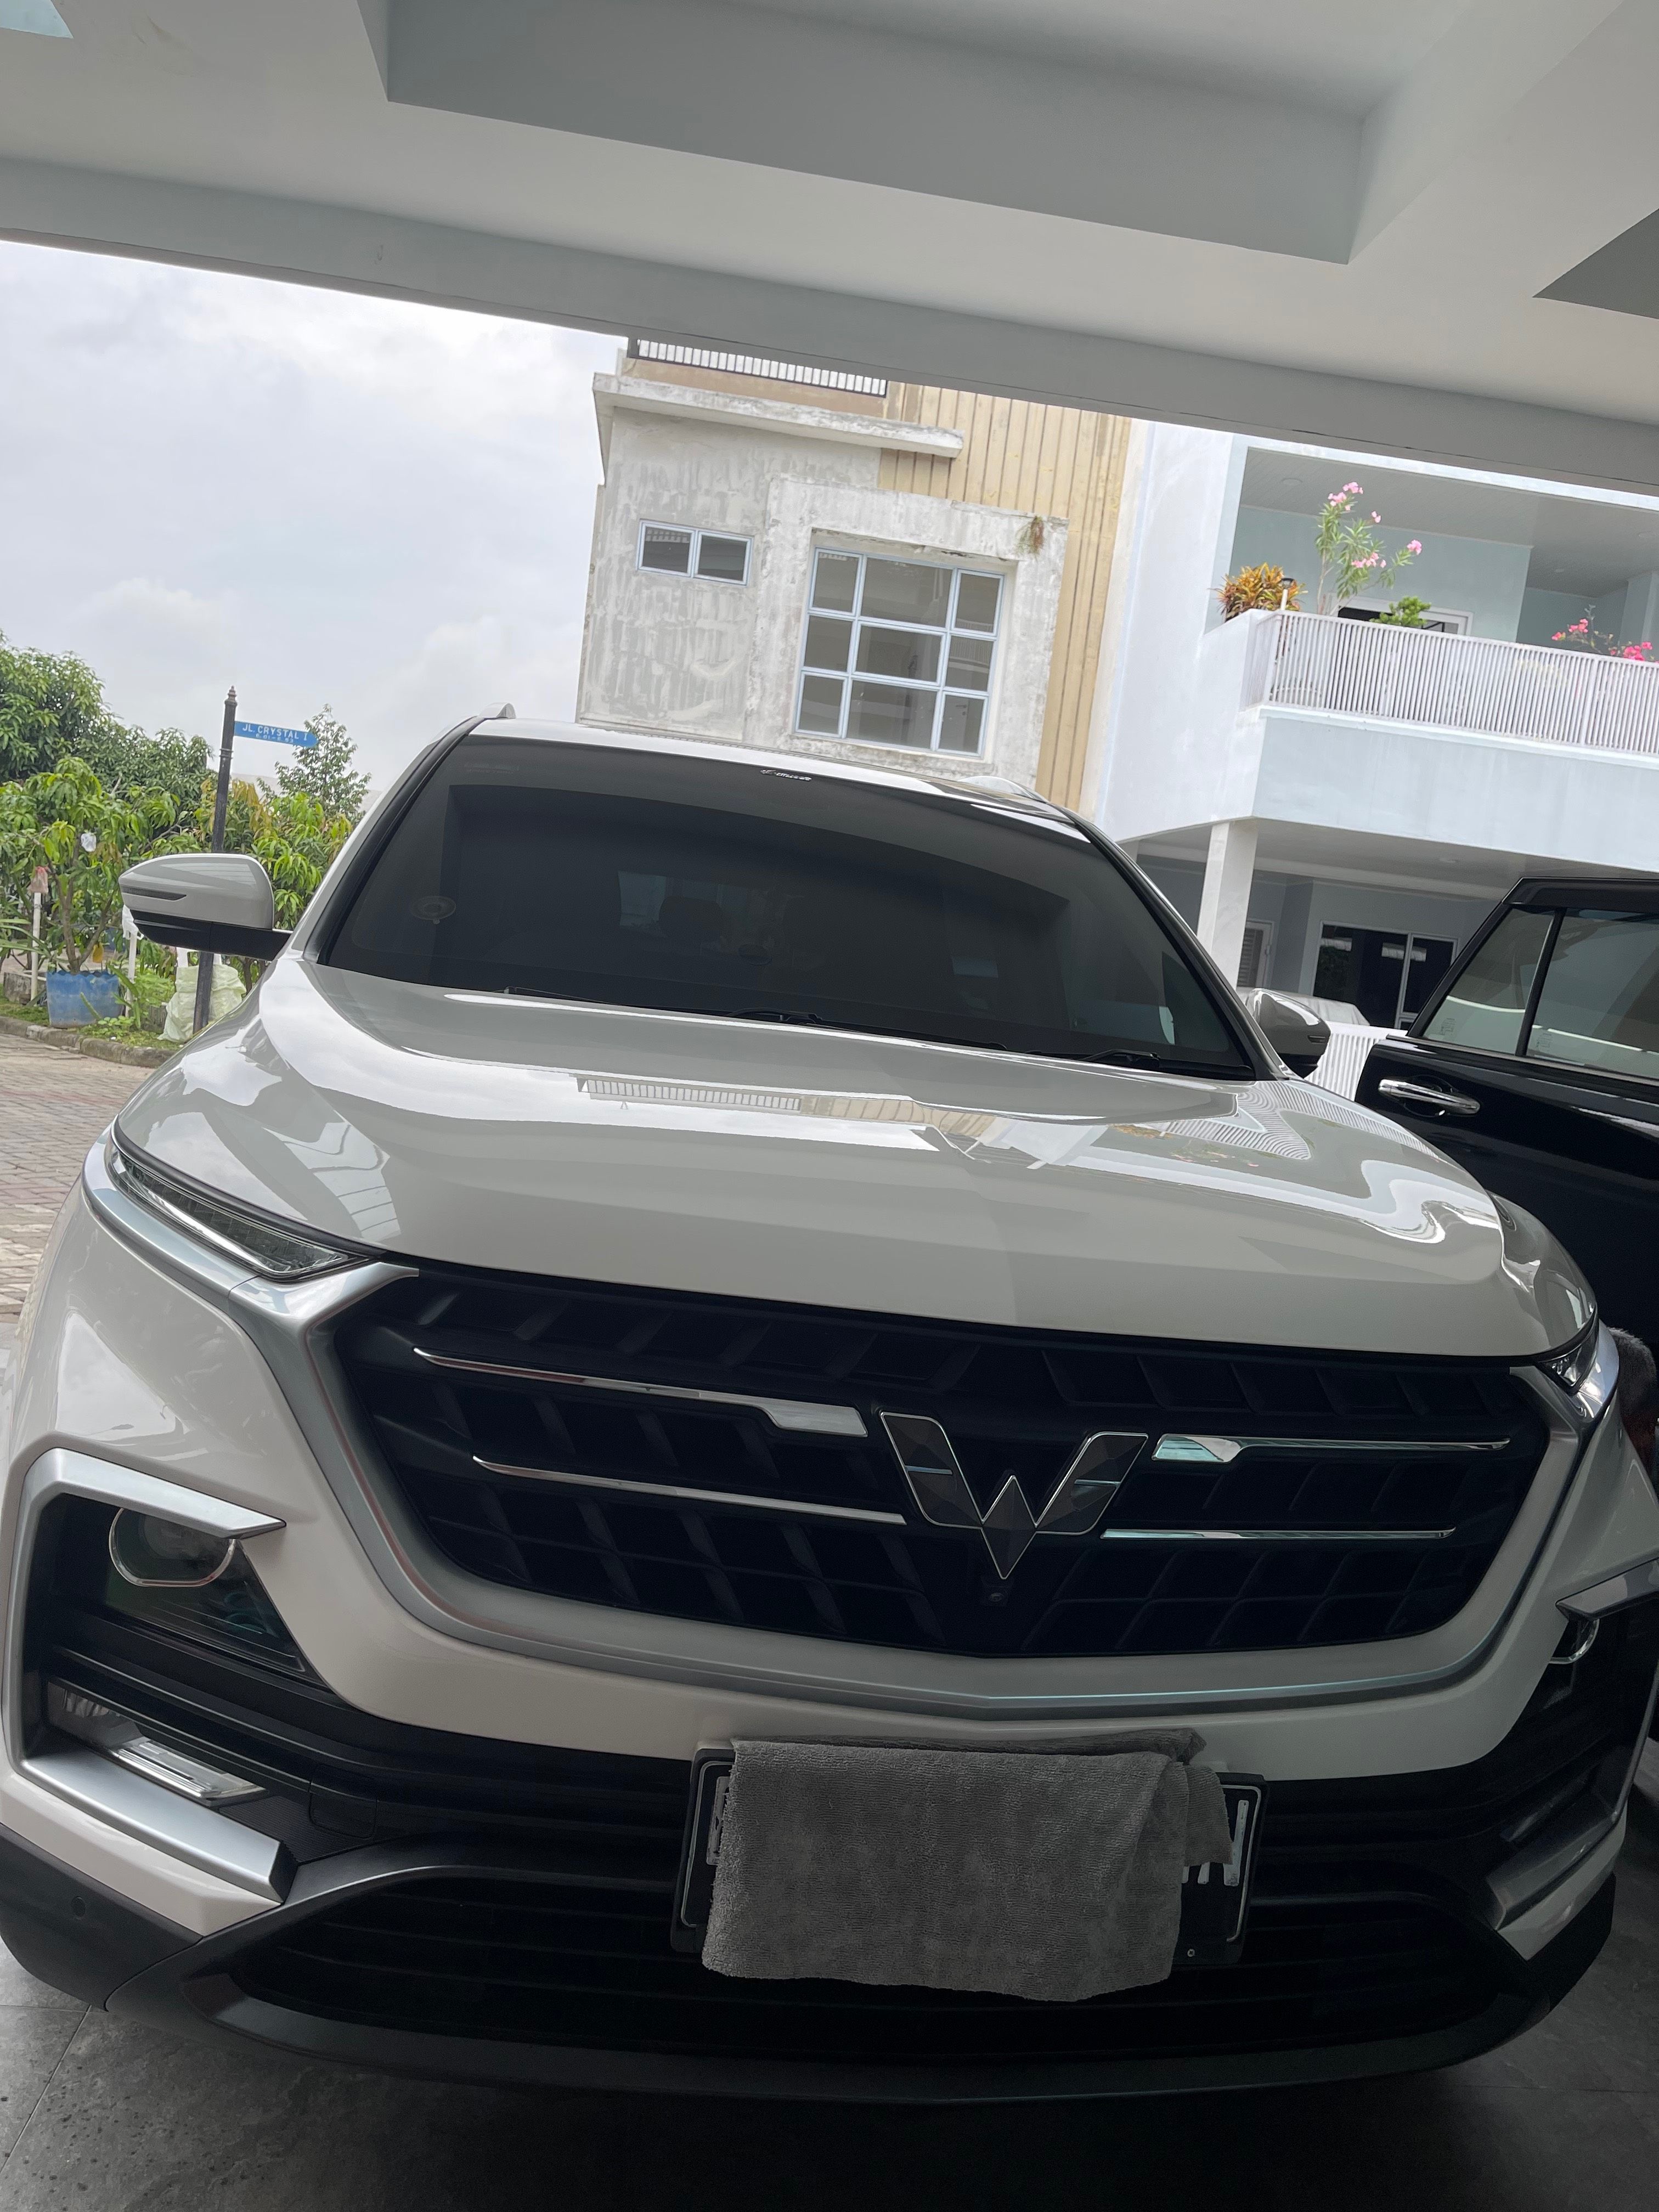 Used 2019 Wuling Almaz 1.5 TURBO LUX AT 1.5 TURBO LUX AT